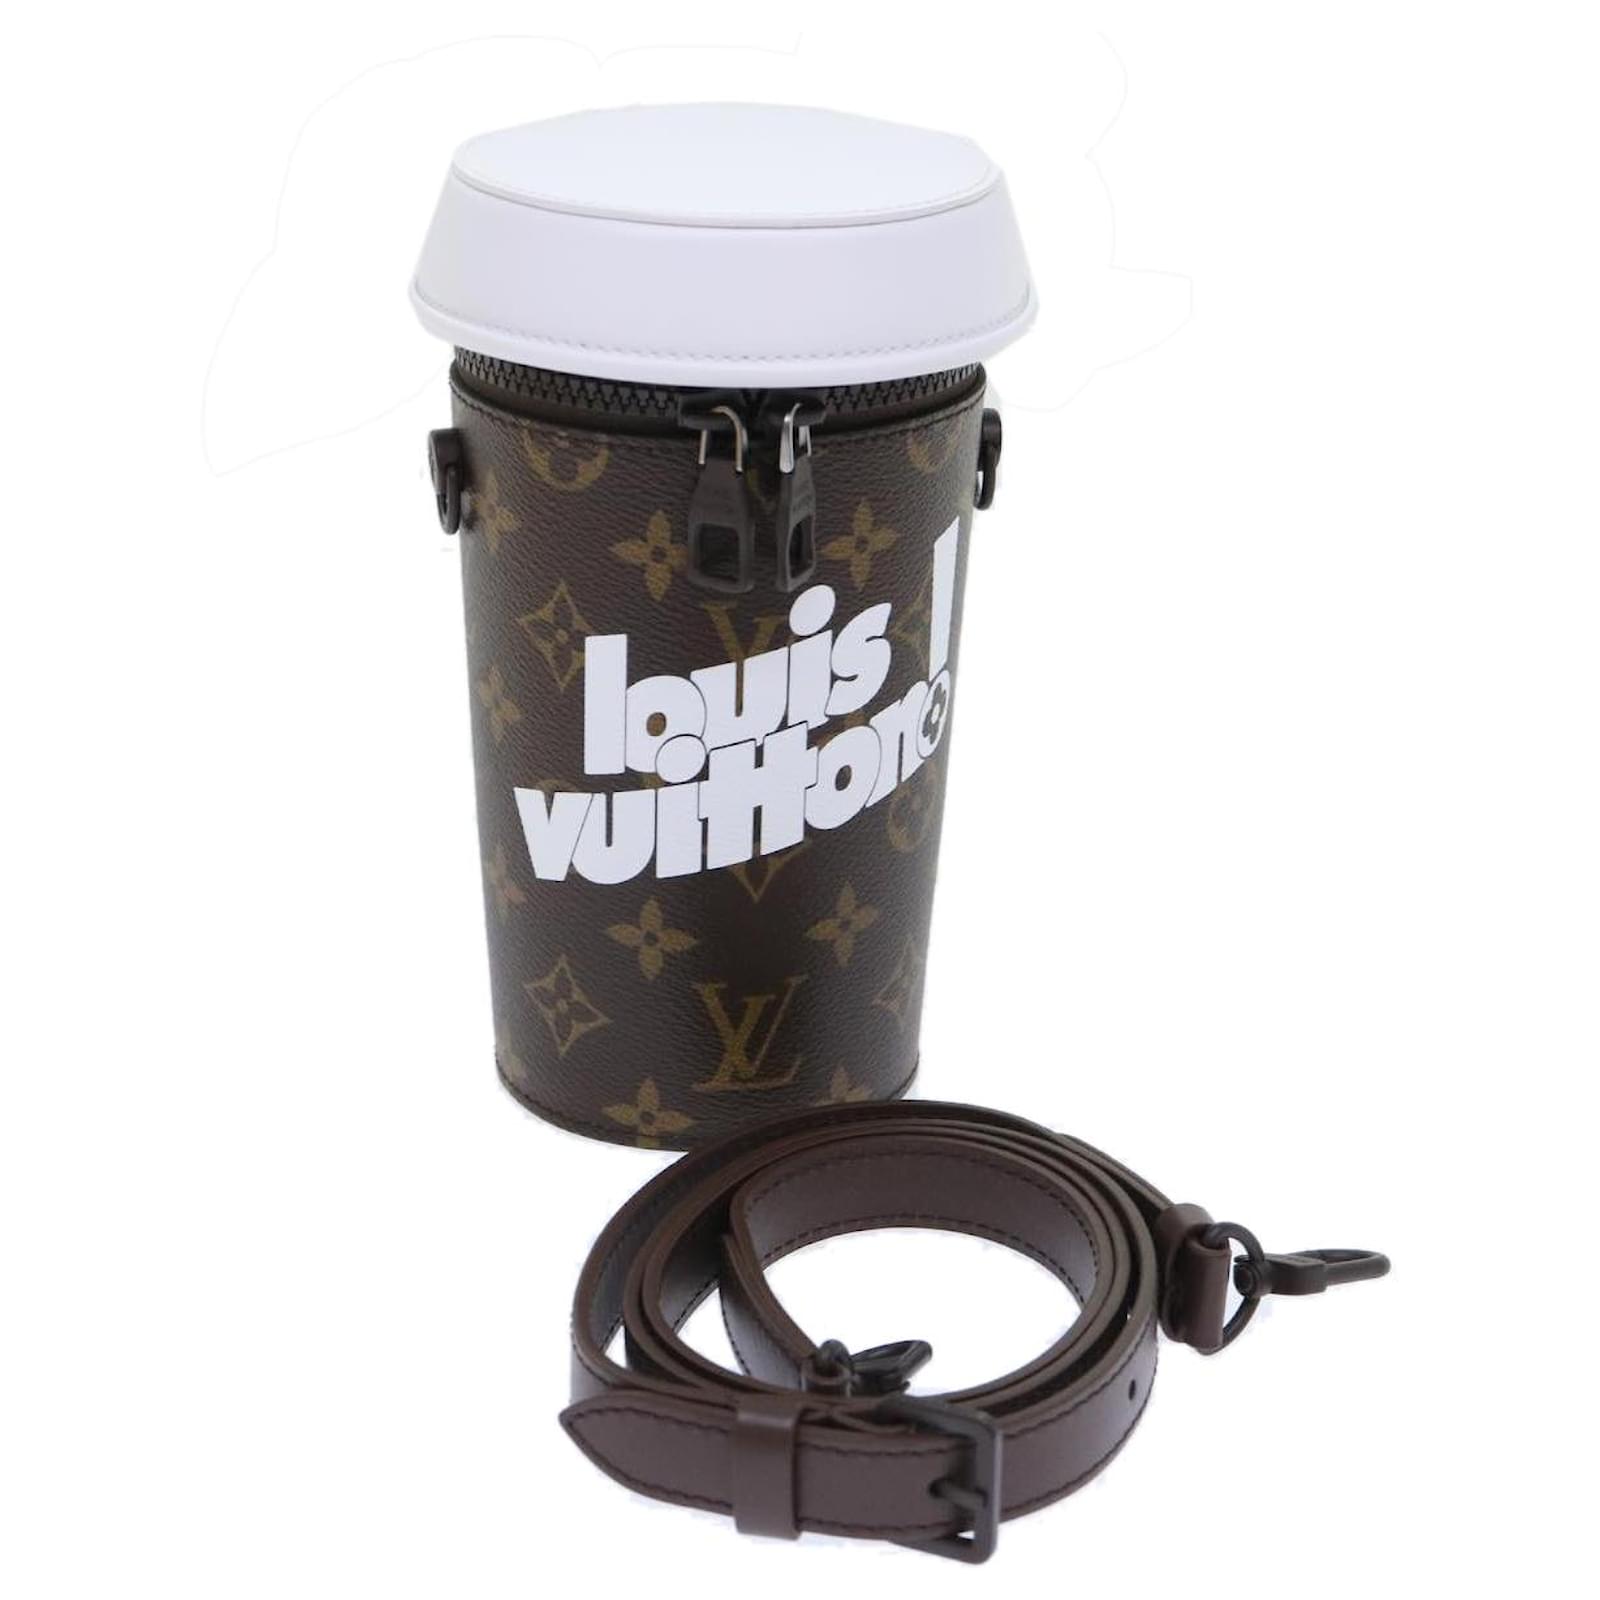 Coffee Cup Pouch - M80812